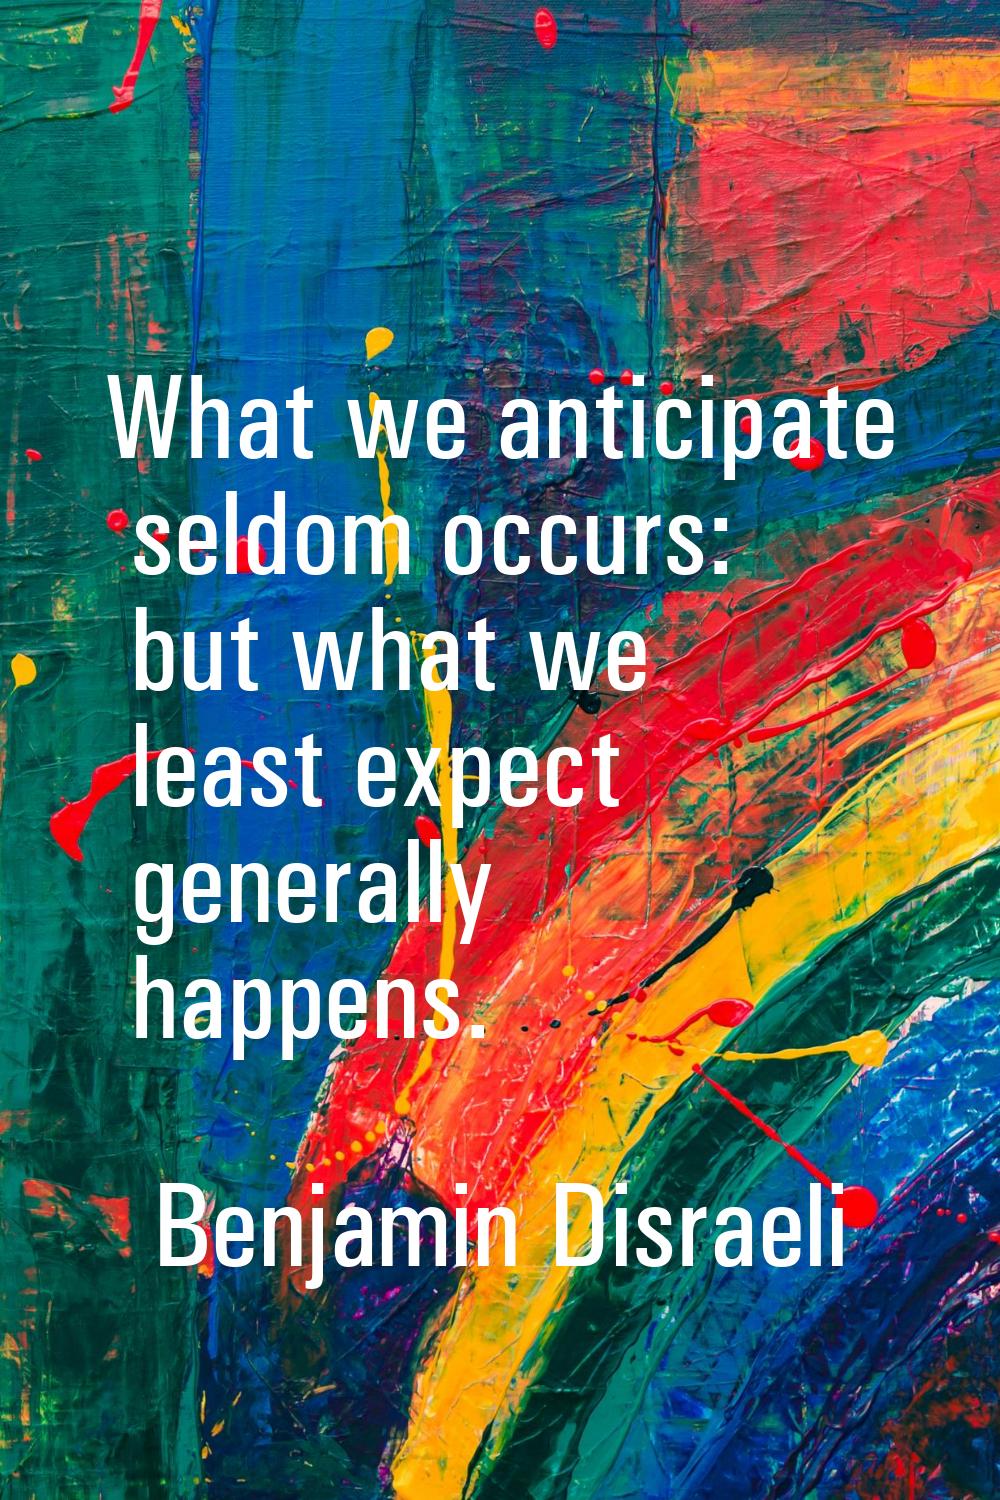 What we anticipate seldom occurs: but what we least expect generally happens.